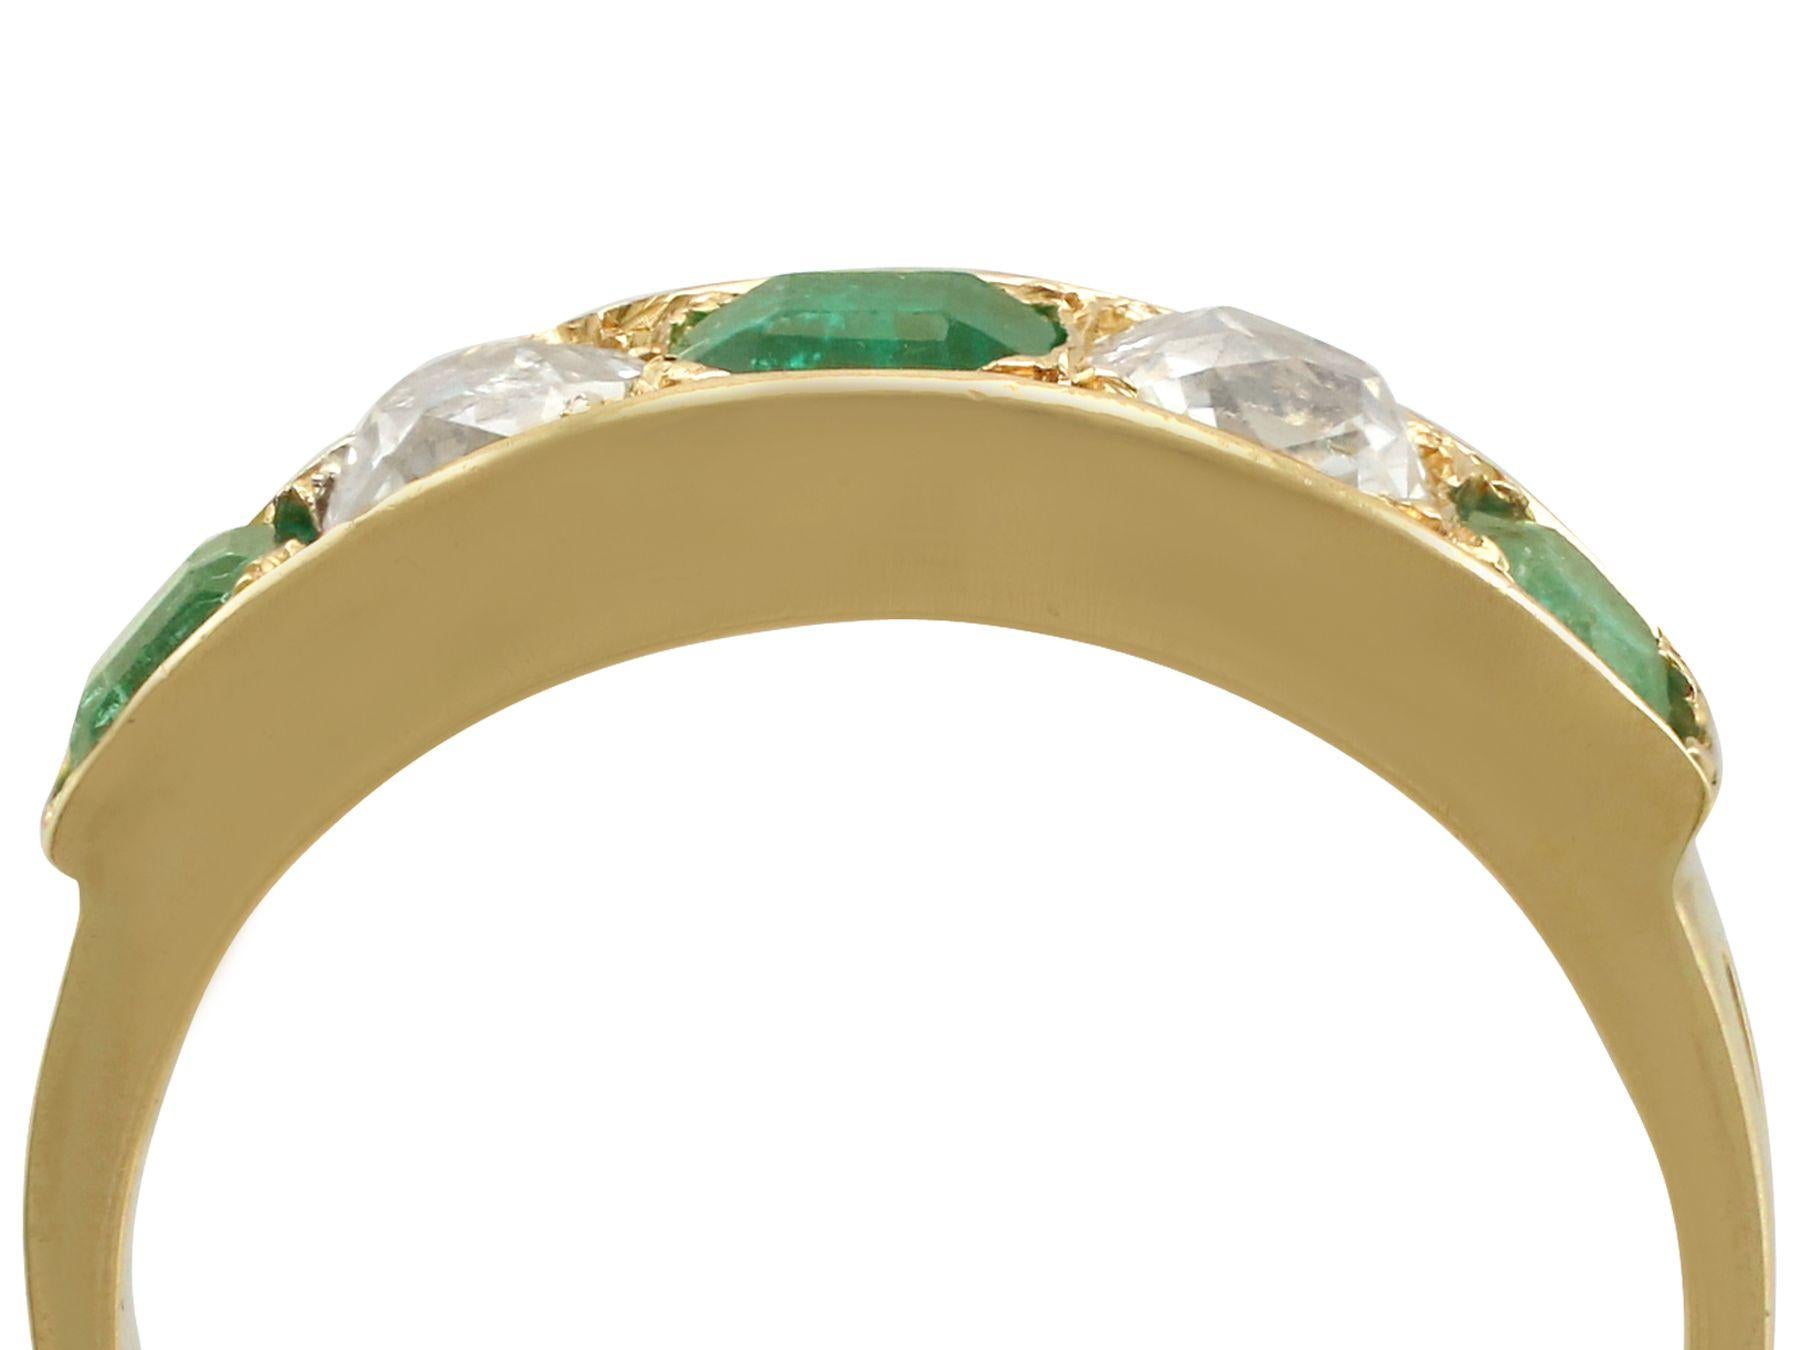 An impressive antique 0.80 carat emerald and 0.62 carat diamond, 18 karat yellow gold five stone cocktail ring; part of our diverse antique jewelry collections.

This fine and impressive diamond and emerald ring has been crafted in 18k yellow